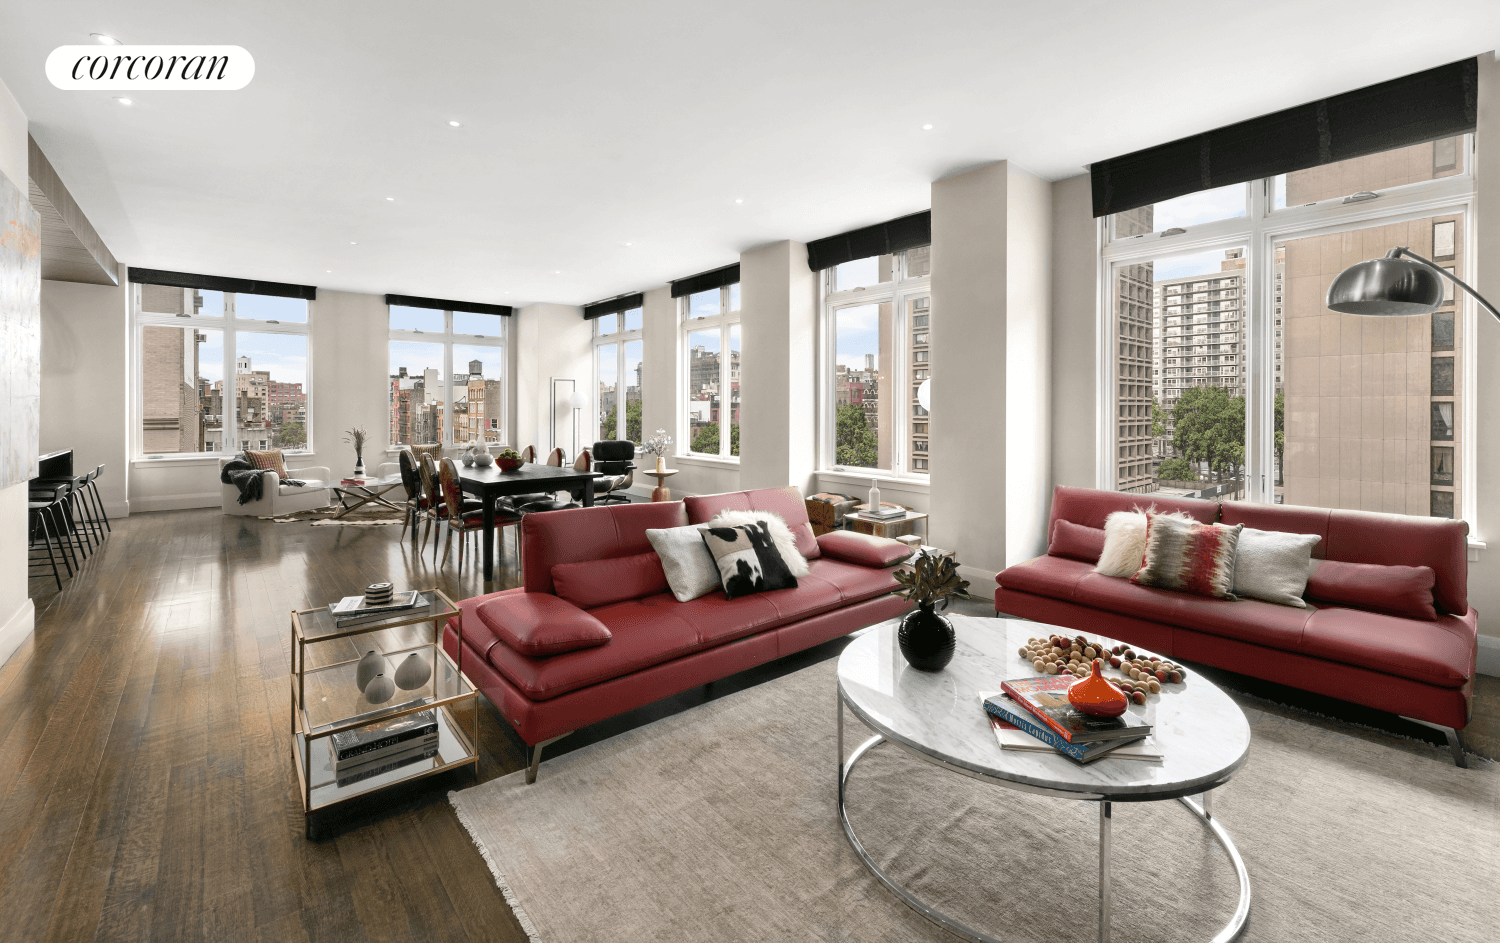 Located in one of SoHo's Premier 24 hour doorman condominiums, unit 5A at 160 Wooster Street is a dramatic corner loft fully re imagined by renowned interior designer, Shamir Shah.